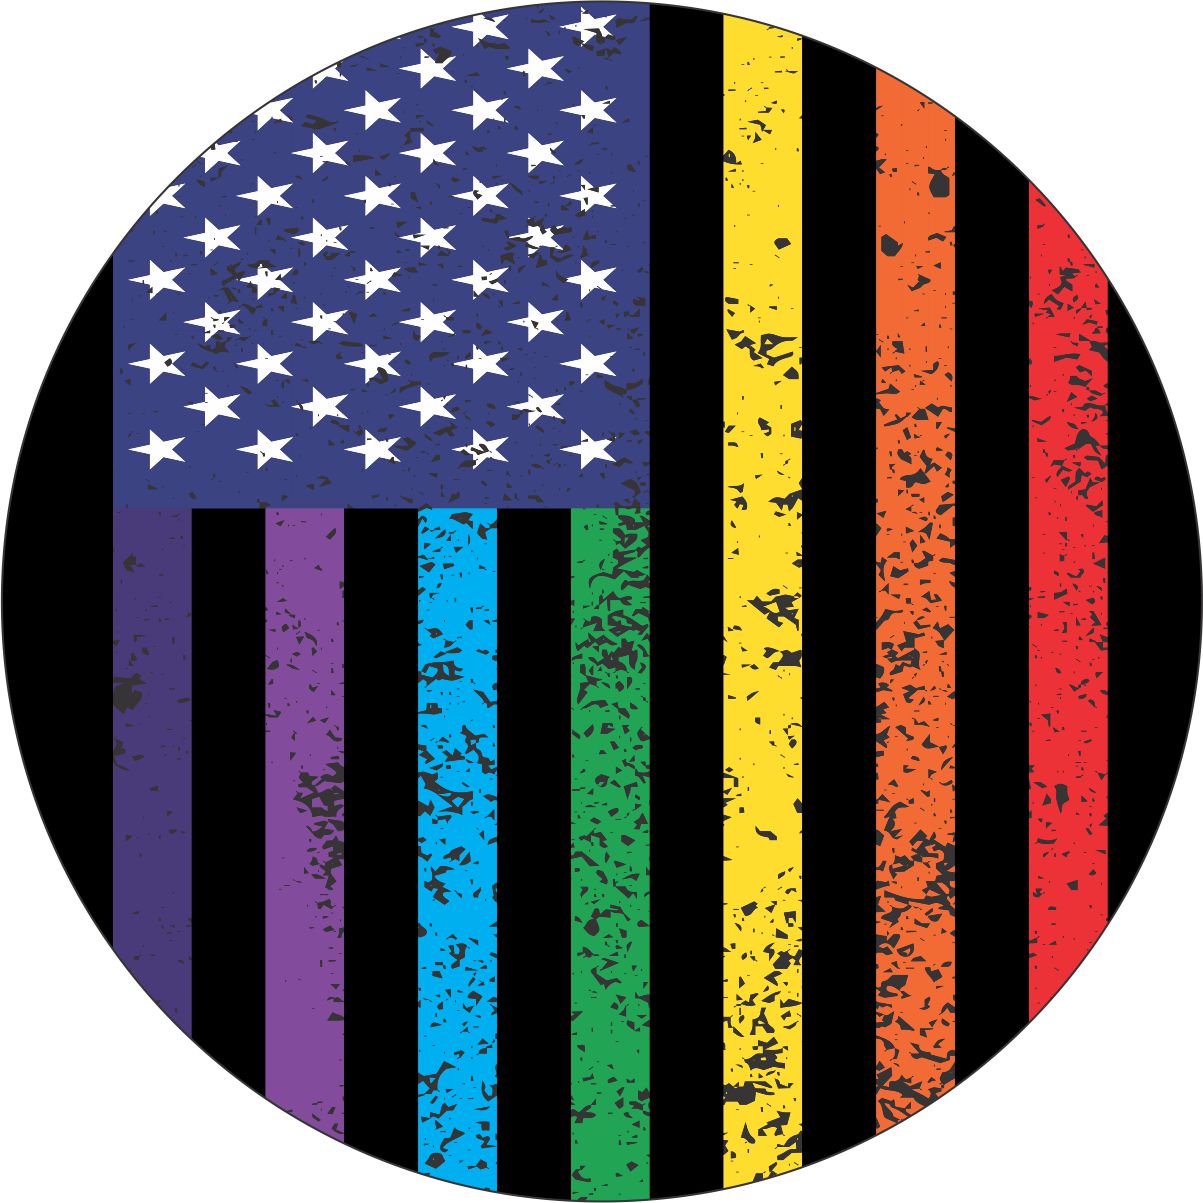 Black vinyl spare tire cover design of what looks like an American flag with white stars but with distressed rainbow colors for stripes in red, orange, yellow, green, blue, indigo, and violet.